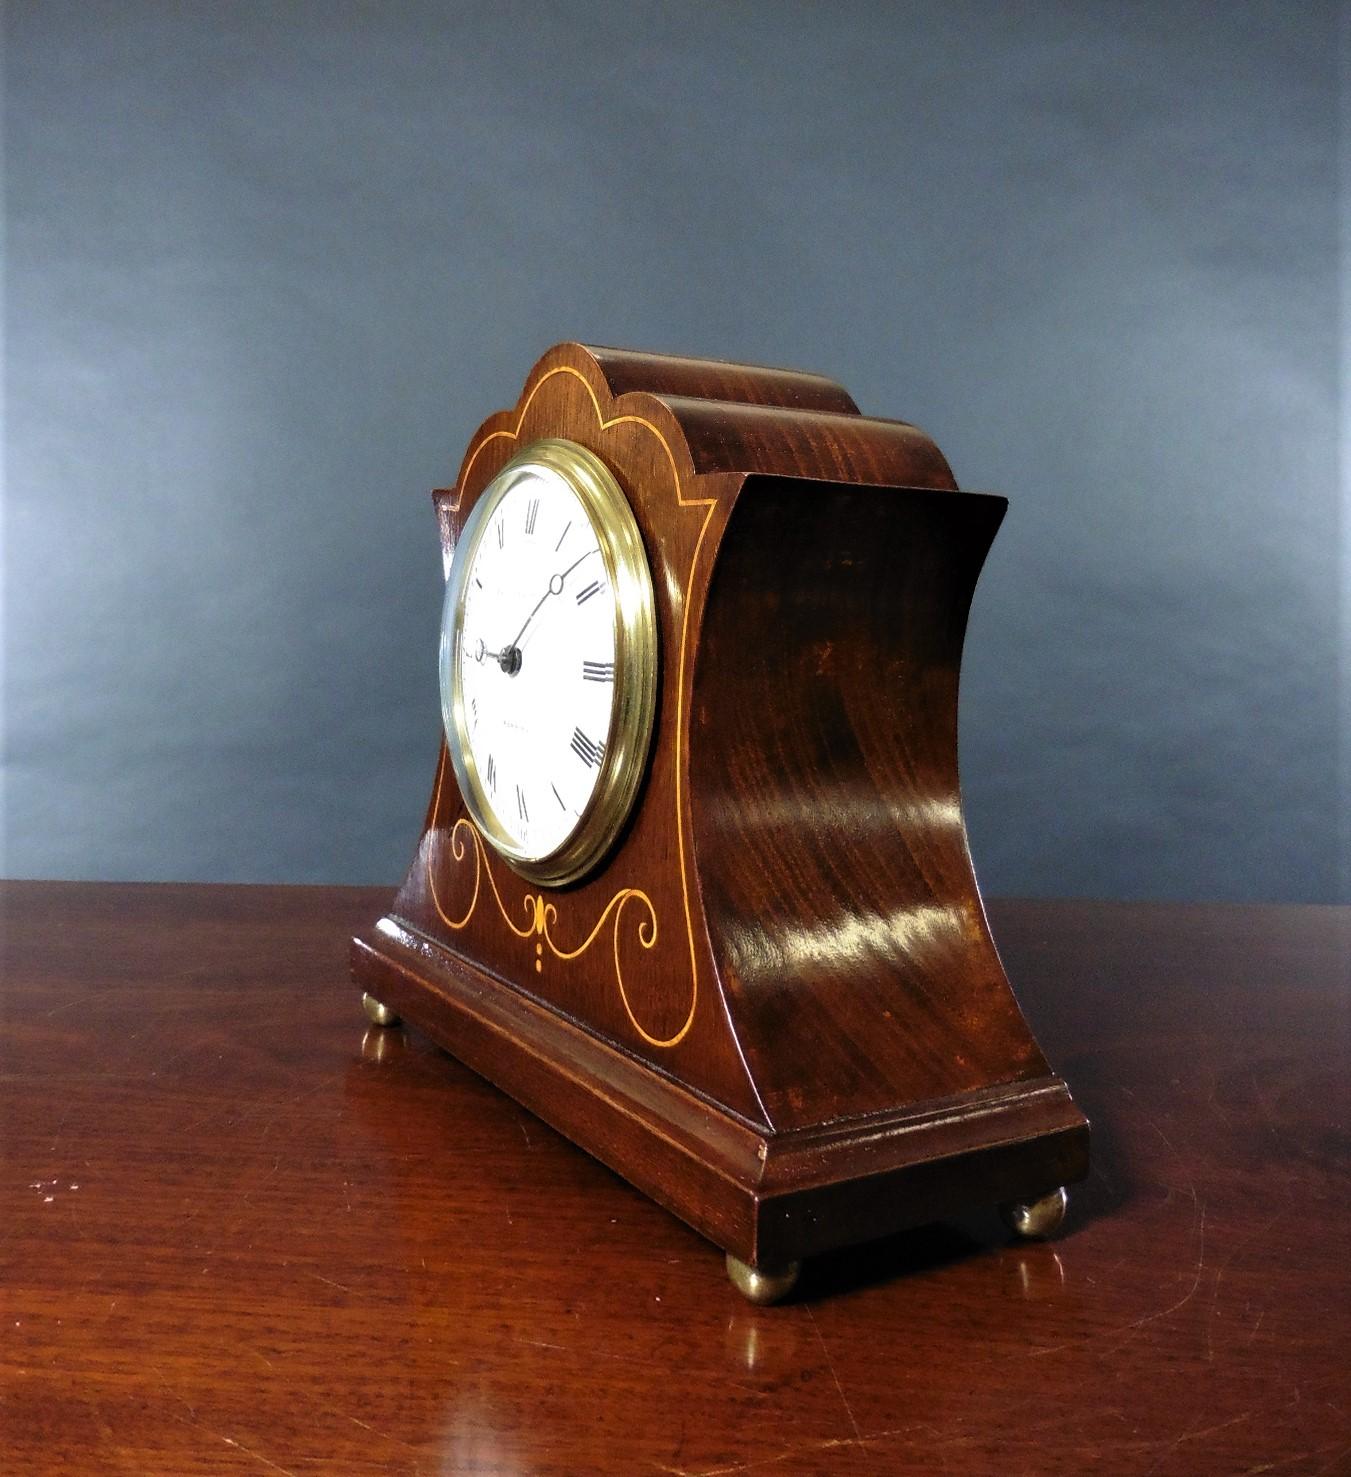 Edwardian mahogany mantel clock standing on a raised stepped plinth and resting on four brass ball feet with satinwood line inlay.

Enamel dial with Roman numerals and original ‘blued’ steel hands signed Botley and Lewis, Reading.

Eight day